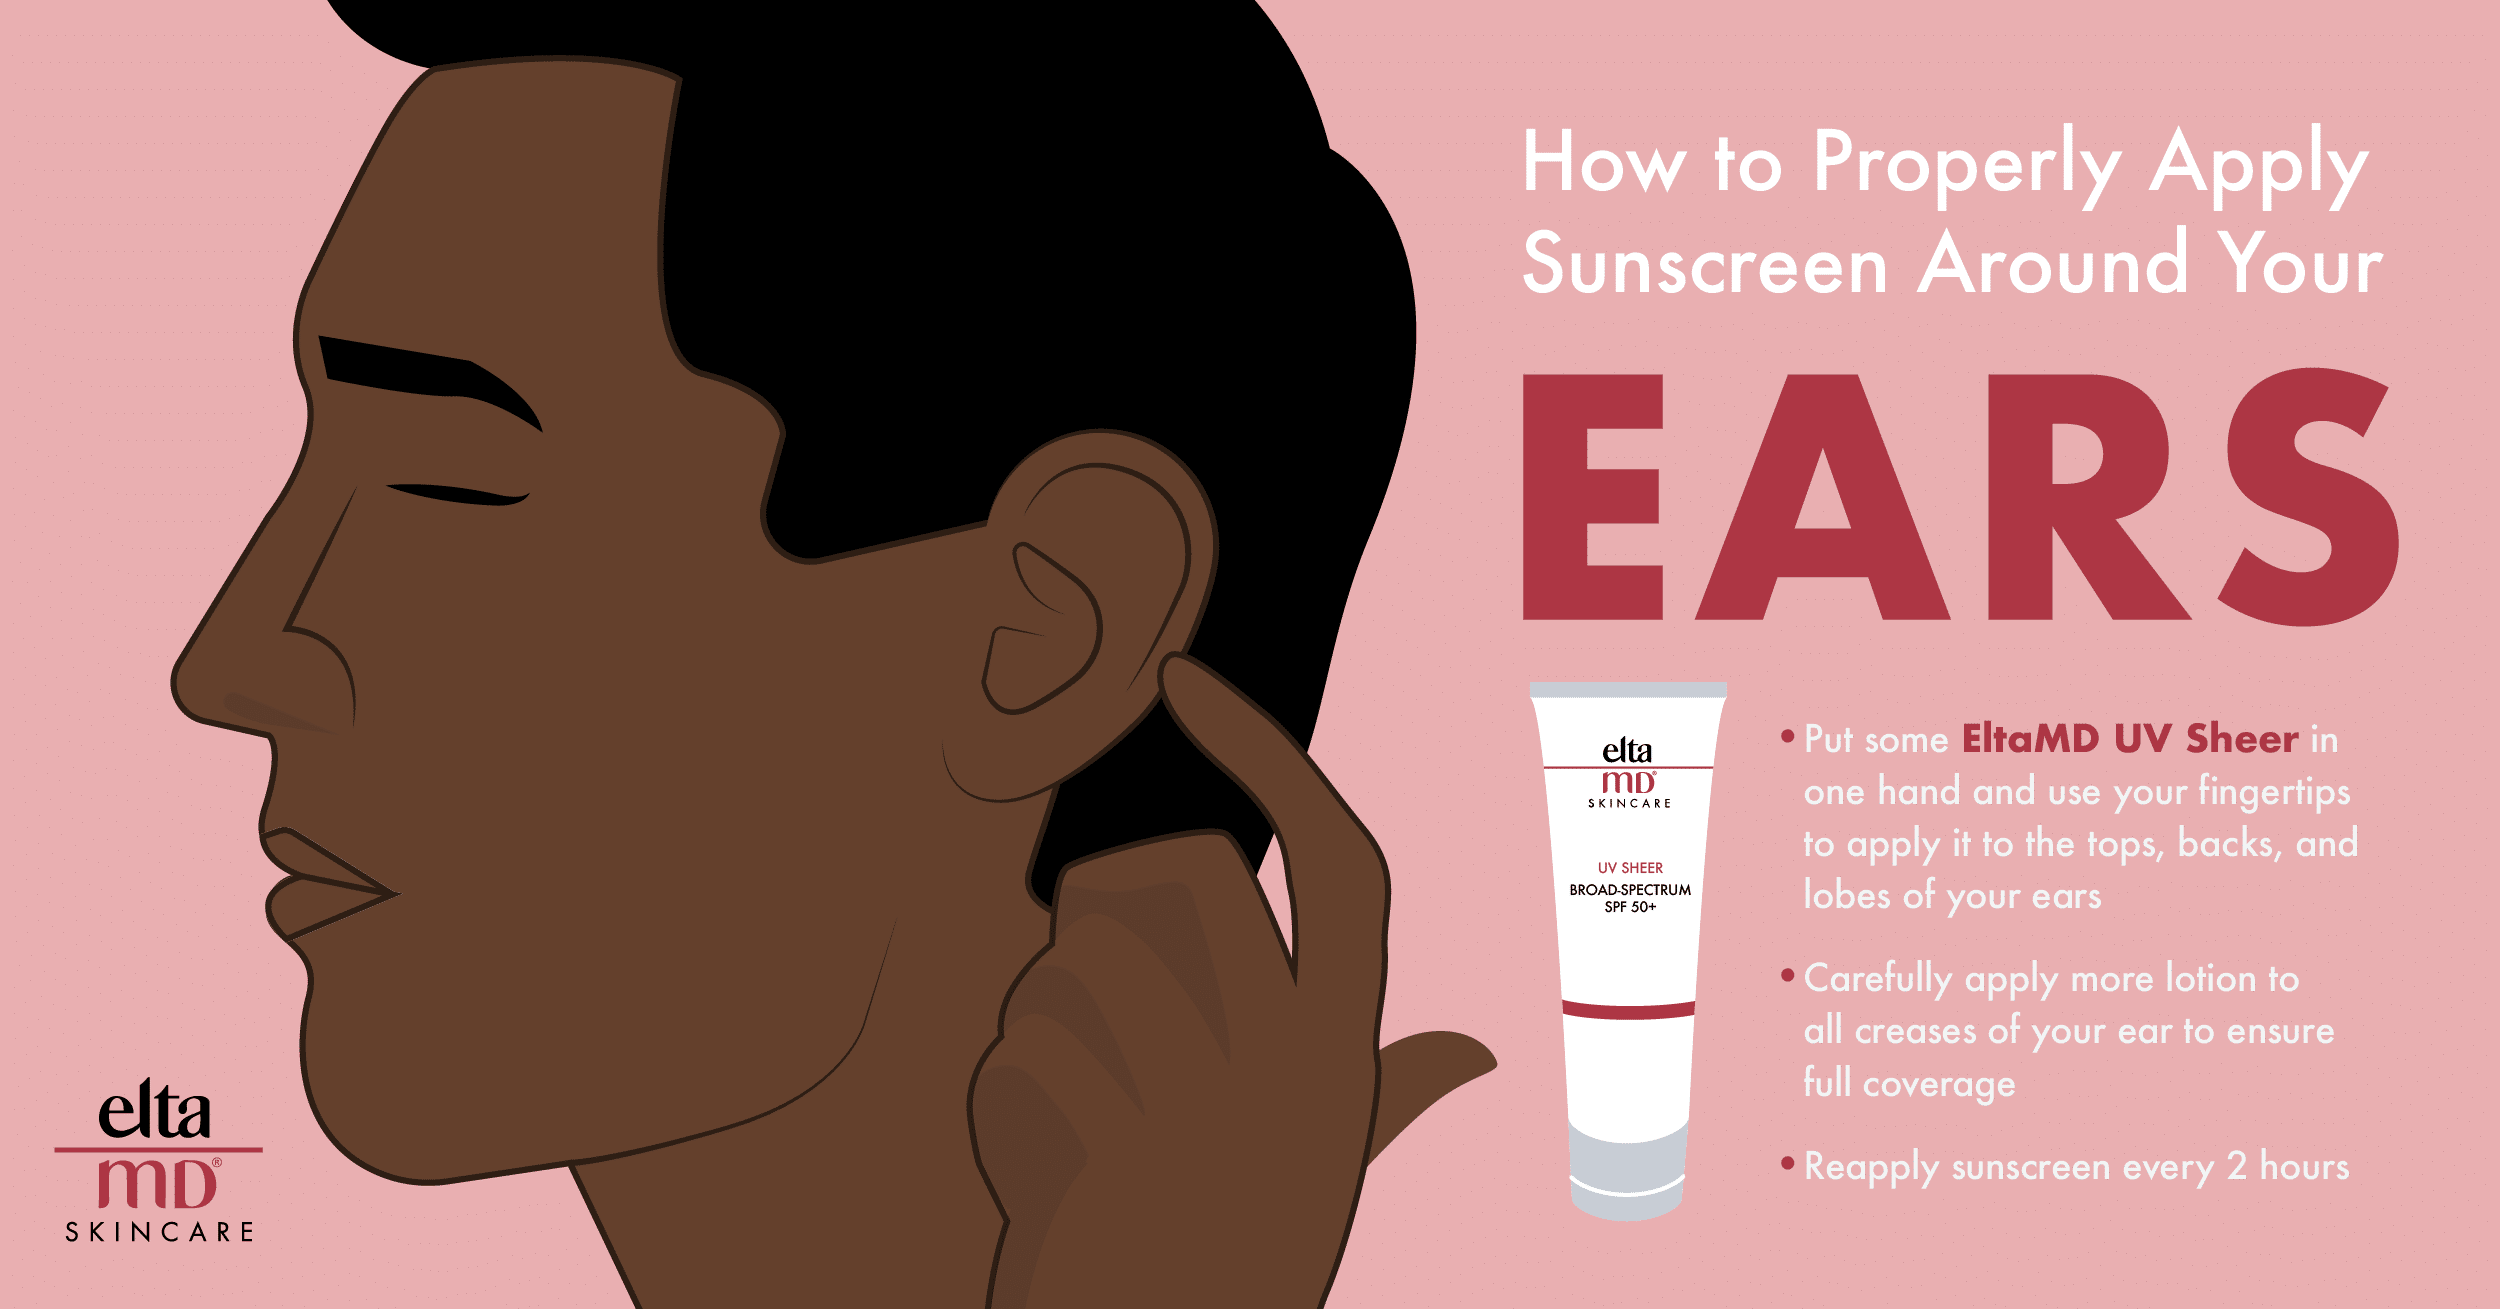 How to Properly Apply Sunscreen Around Your Ears